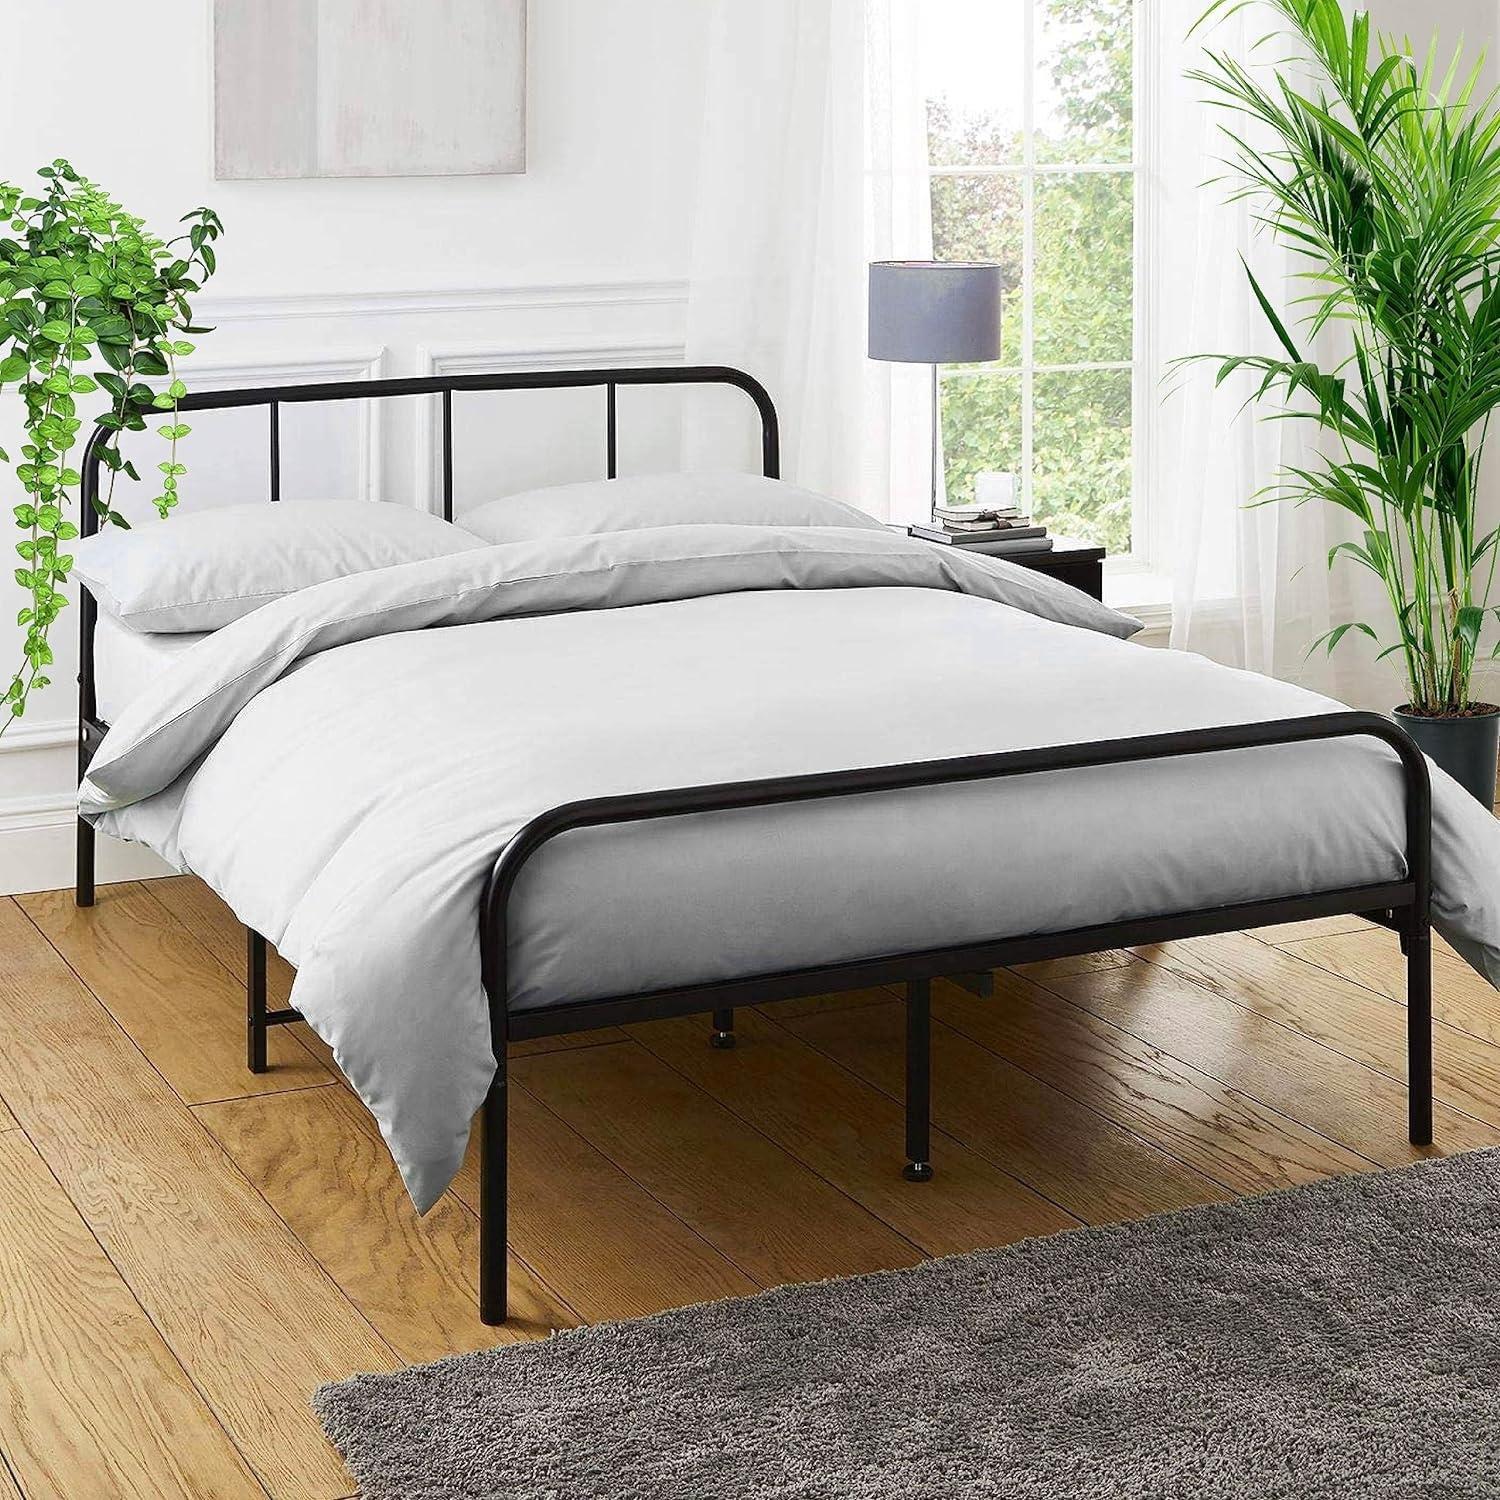 Double Size Bed Frame Metal Rounded Headboard Easy Assembly Bed Base Storage